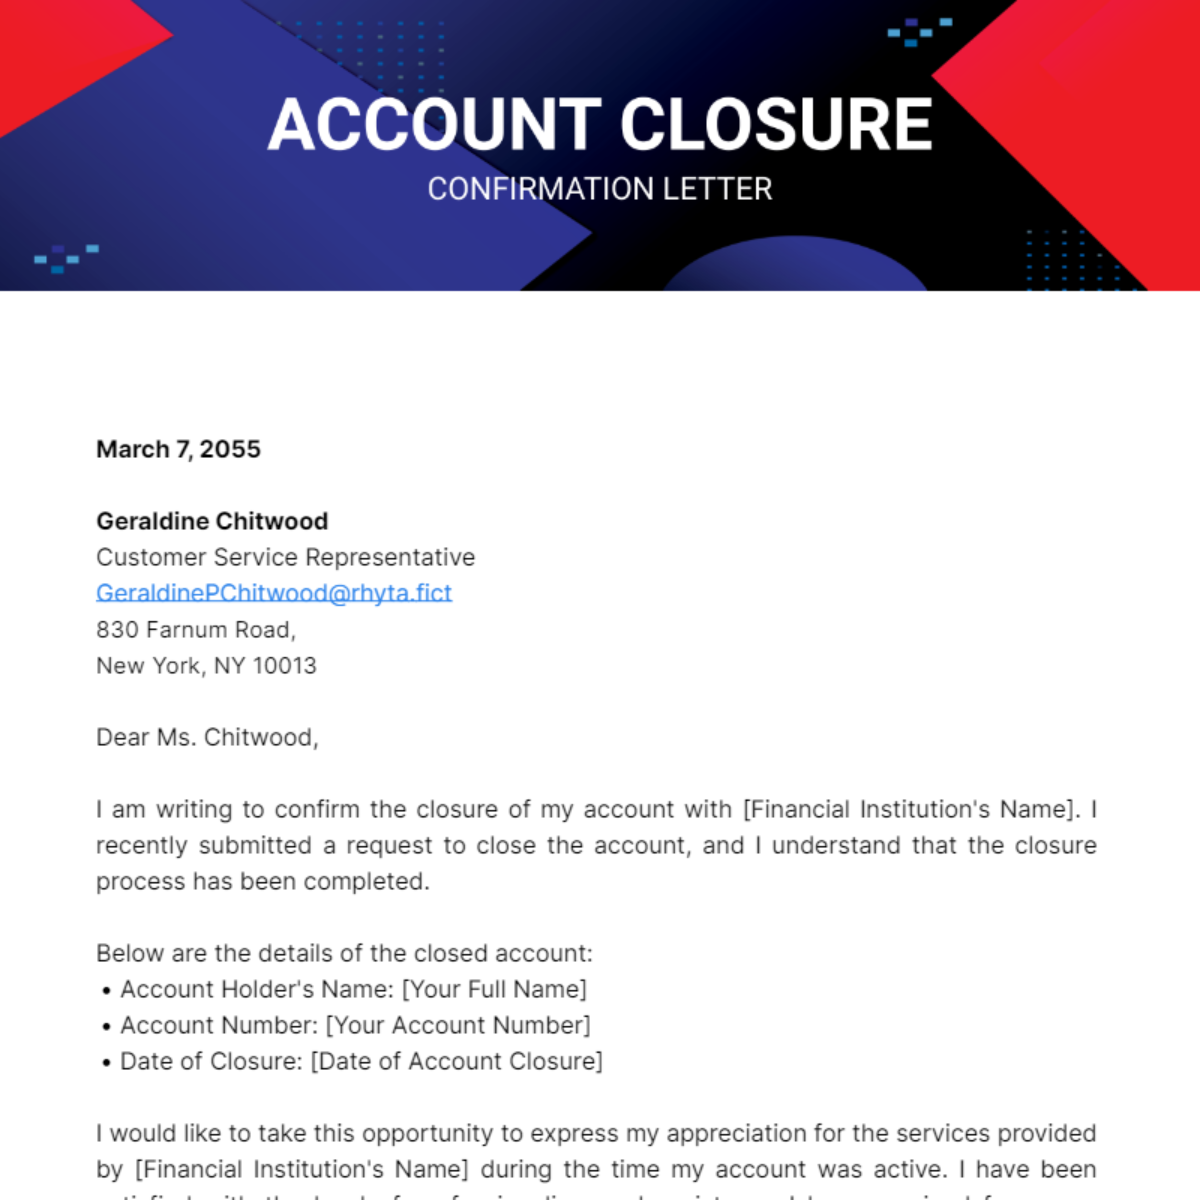 Account Closure Confirmation Letter Template